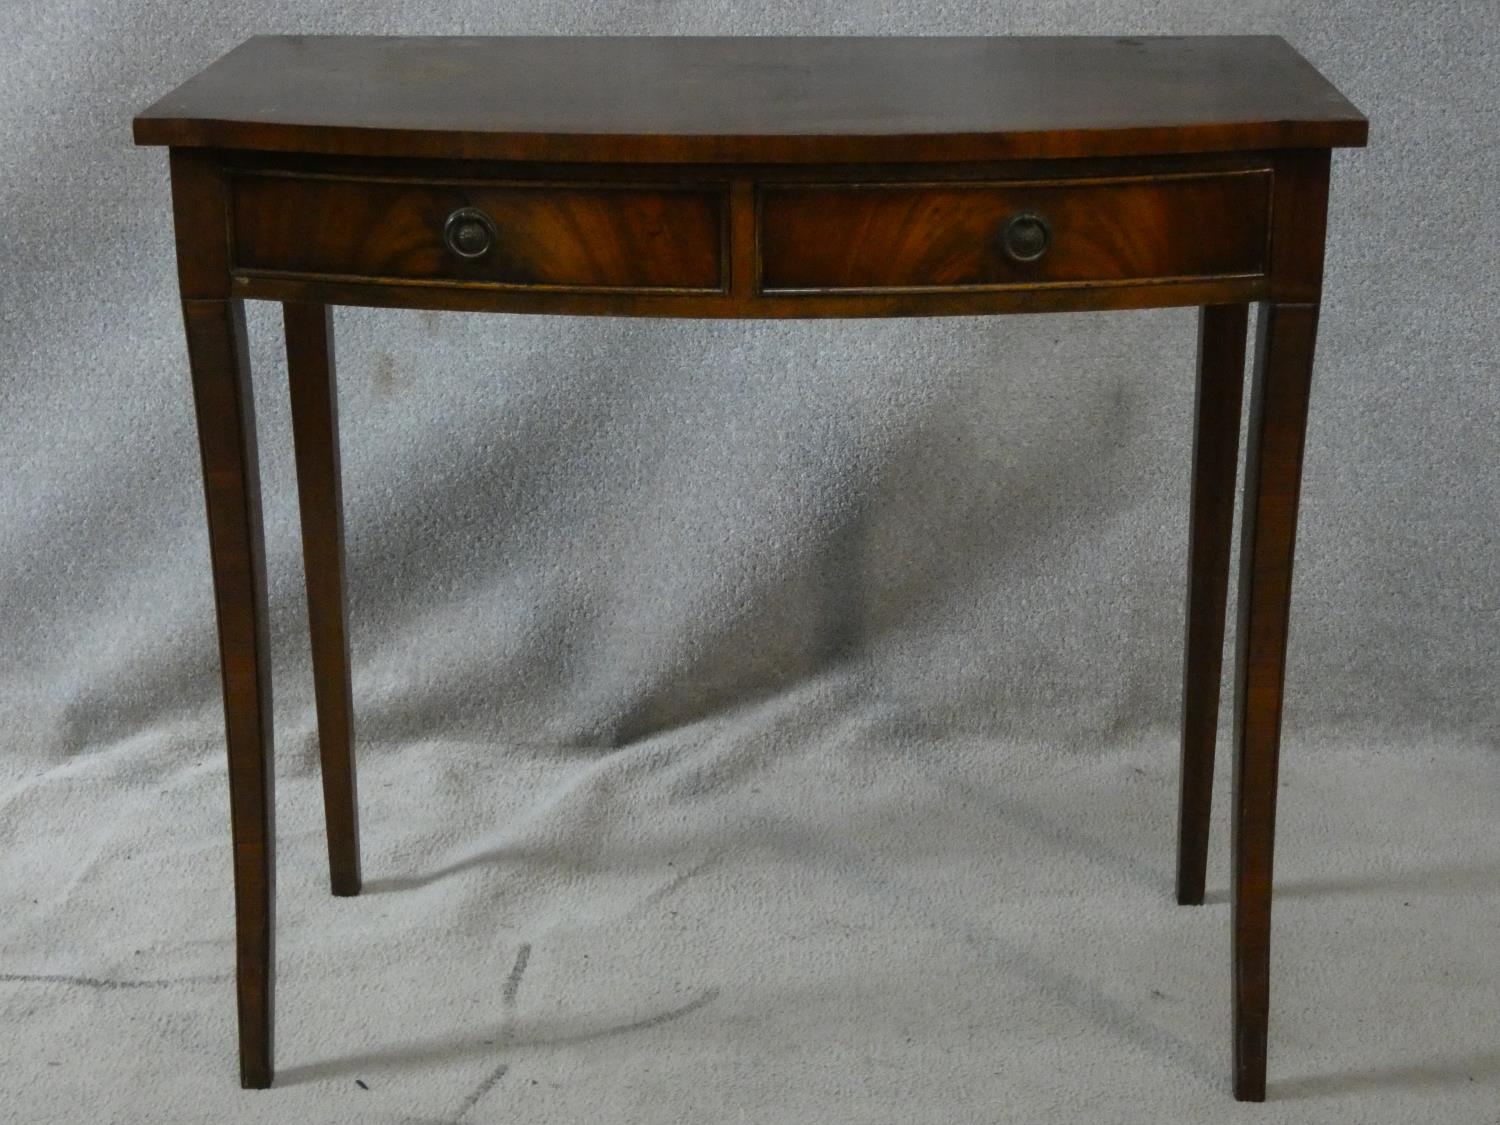 A Regency style flame mahogany console table fitted with frieze drawers on sabre supports. H.77 L.85